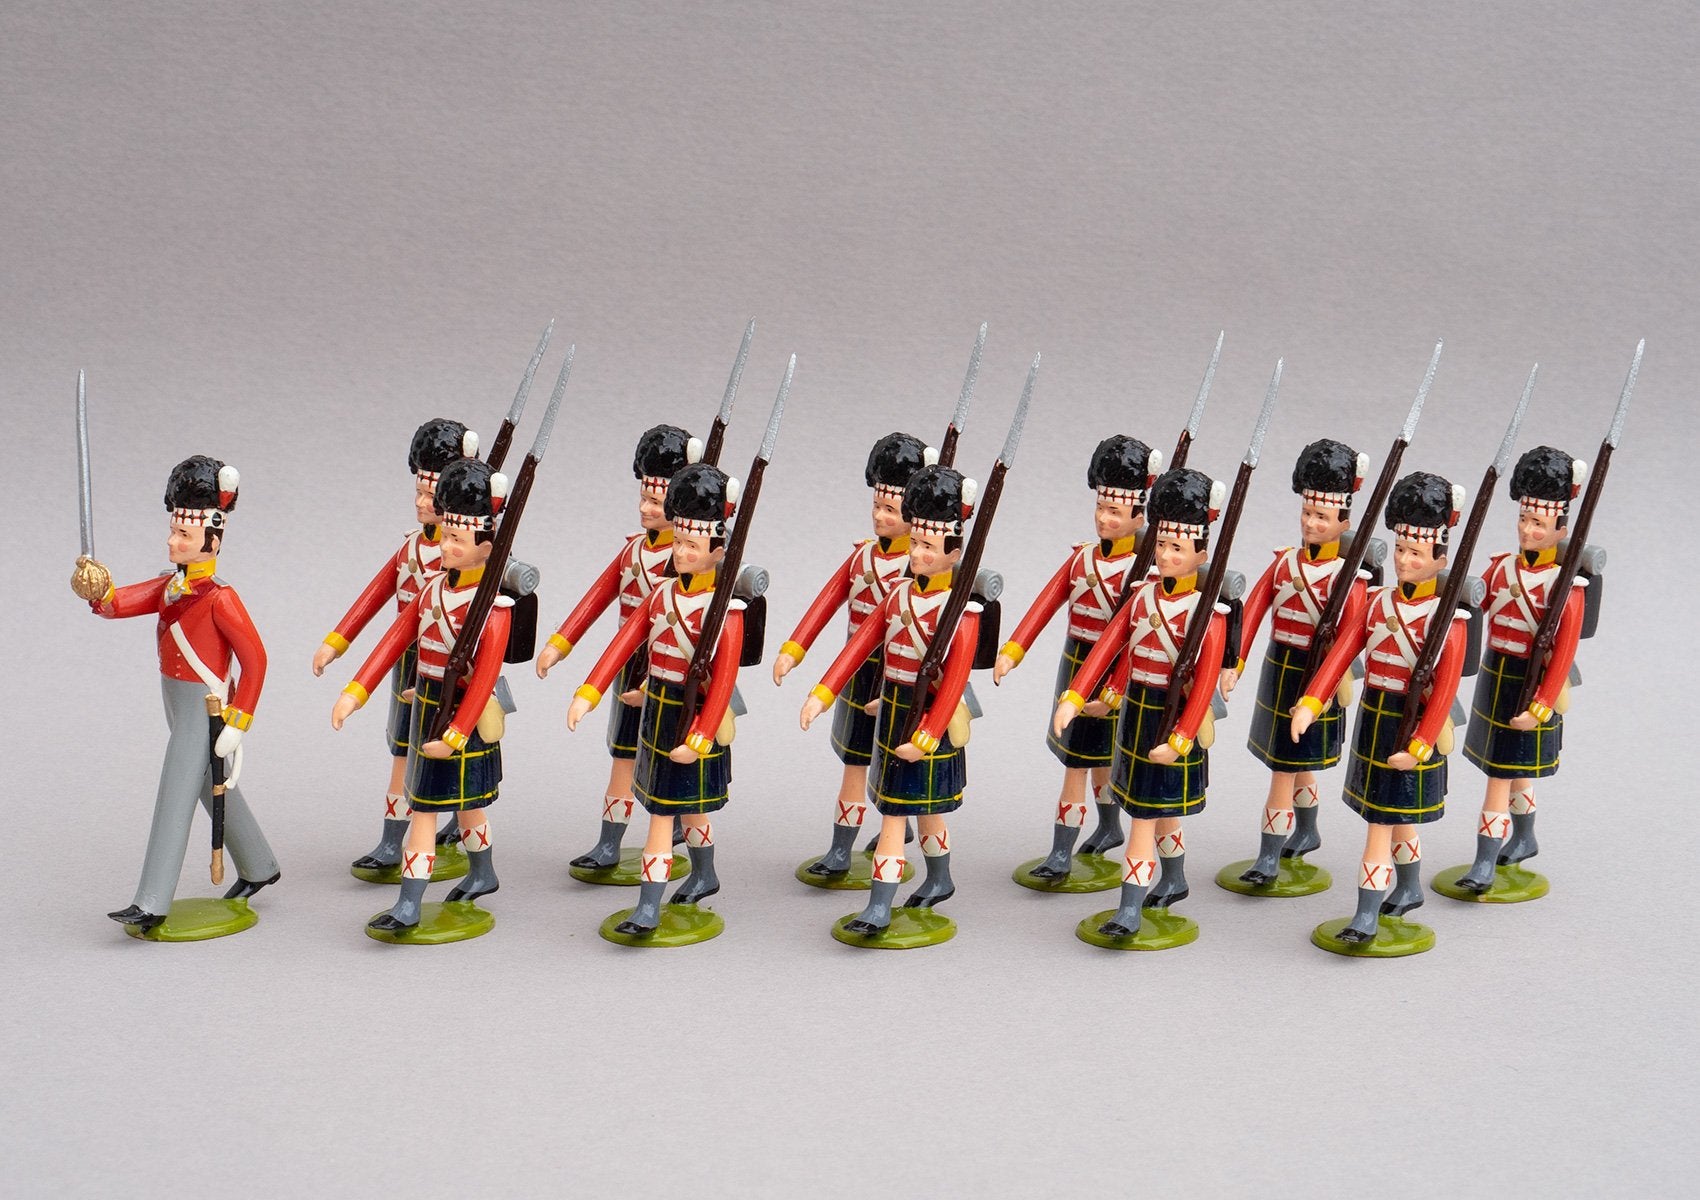 Set 116a Gordon Highlanders, Waterloo 1815 add-on | British Infantry | Napoleonic Wars | Combined sets 116 and 116a showing 12 Gordon Highlanders. Men wearing bearskin and Gordon Tartan kilts | Waterloo | © Imperial Productions | Sculpt by David Cowe